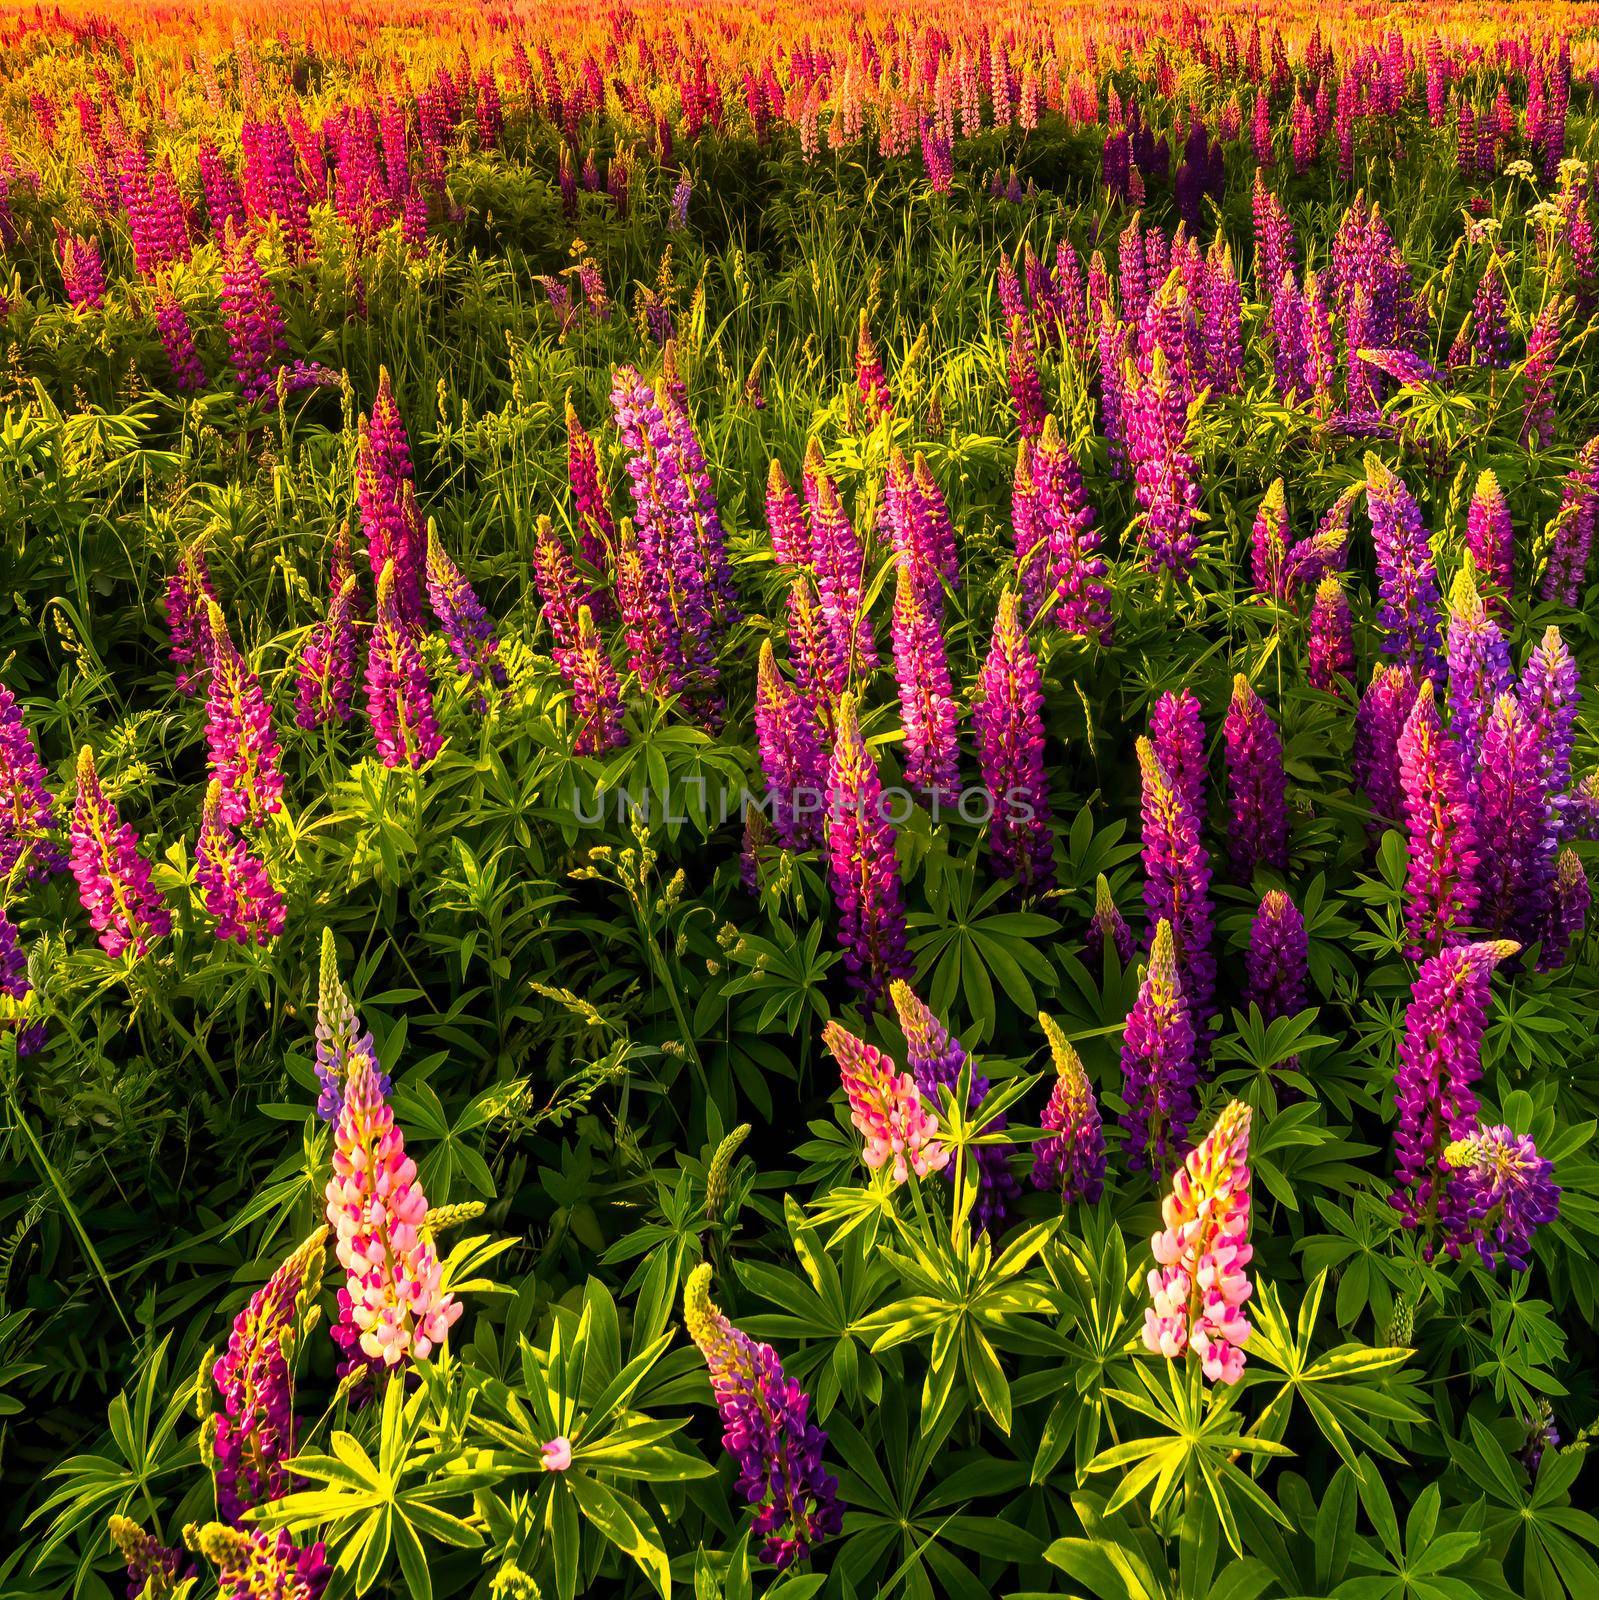 Purple lupins on a field at sunset or sunrise in summer.